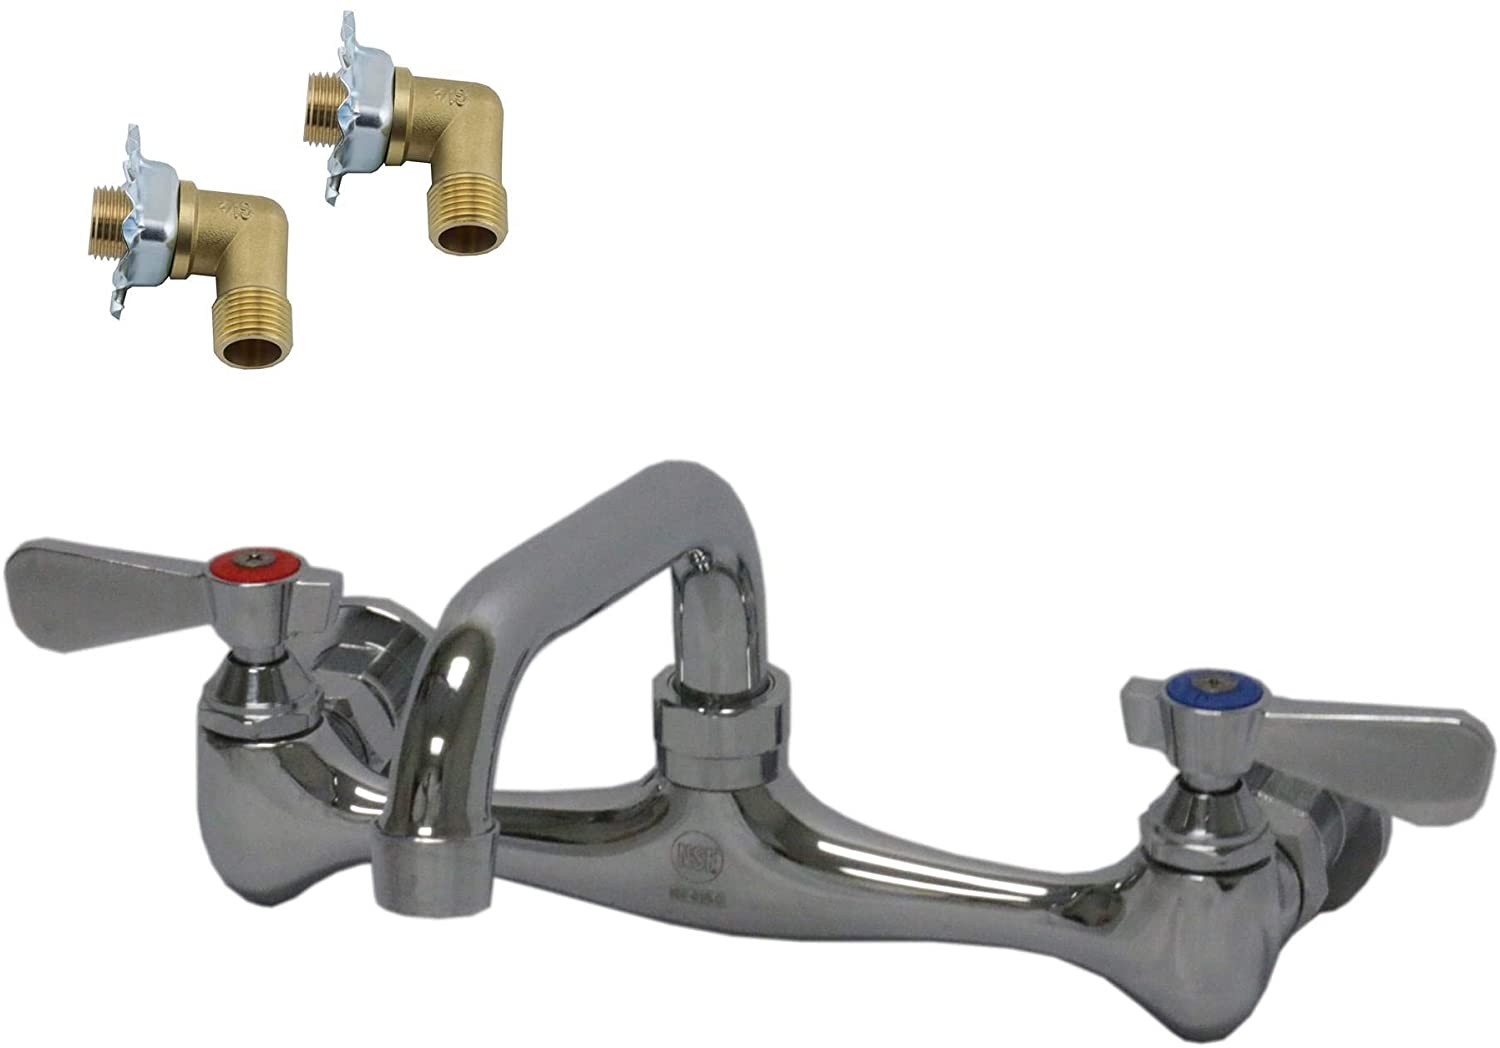 ABC Wall Mount Commercial Duty No Lead Faucet, 8” Center with 6” Swivel Spout, Dual Lever Handles, Chrome Polished and Brass Constructed Body, Installation Kit, NSF Approved (6" Spout + Kit)